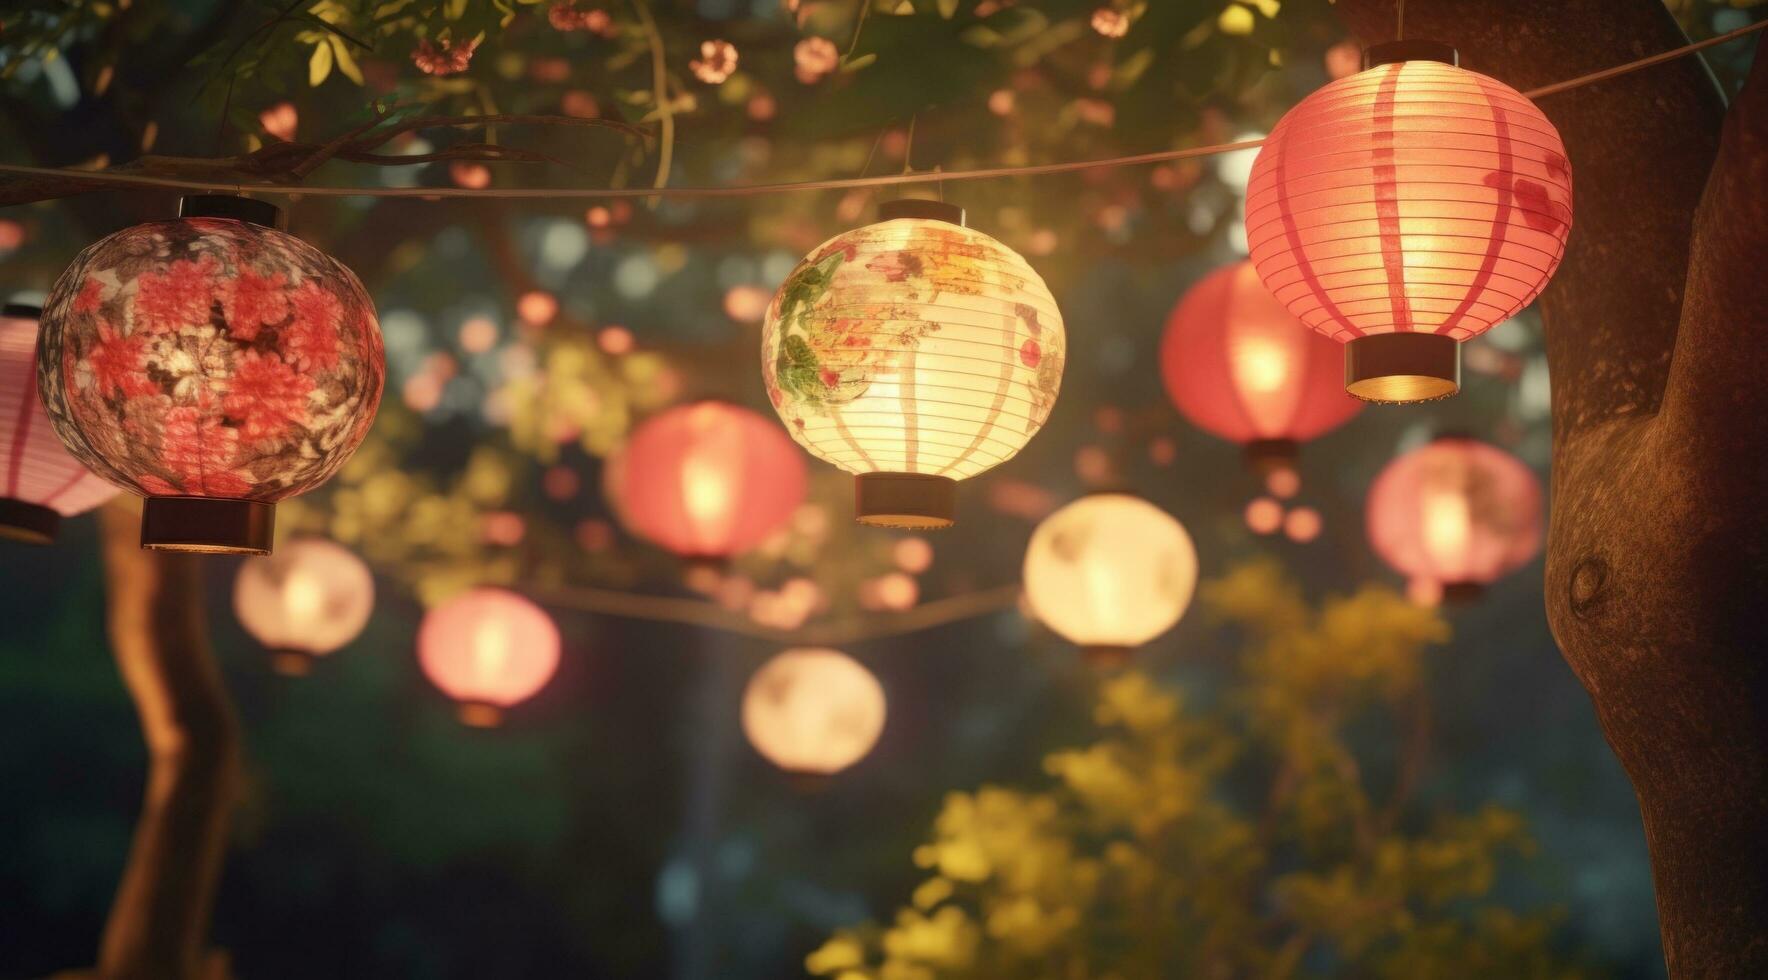 AI generated colorful paper lanterns hanged in trees photo